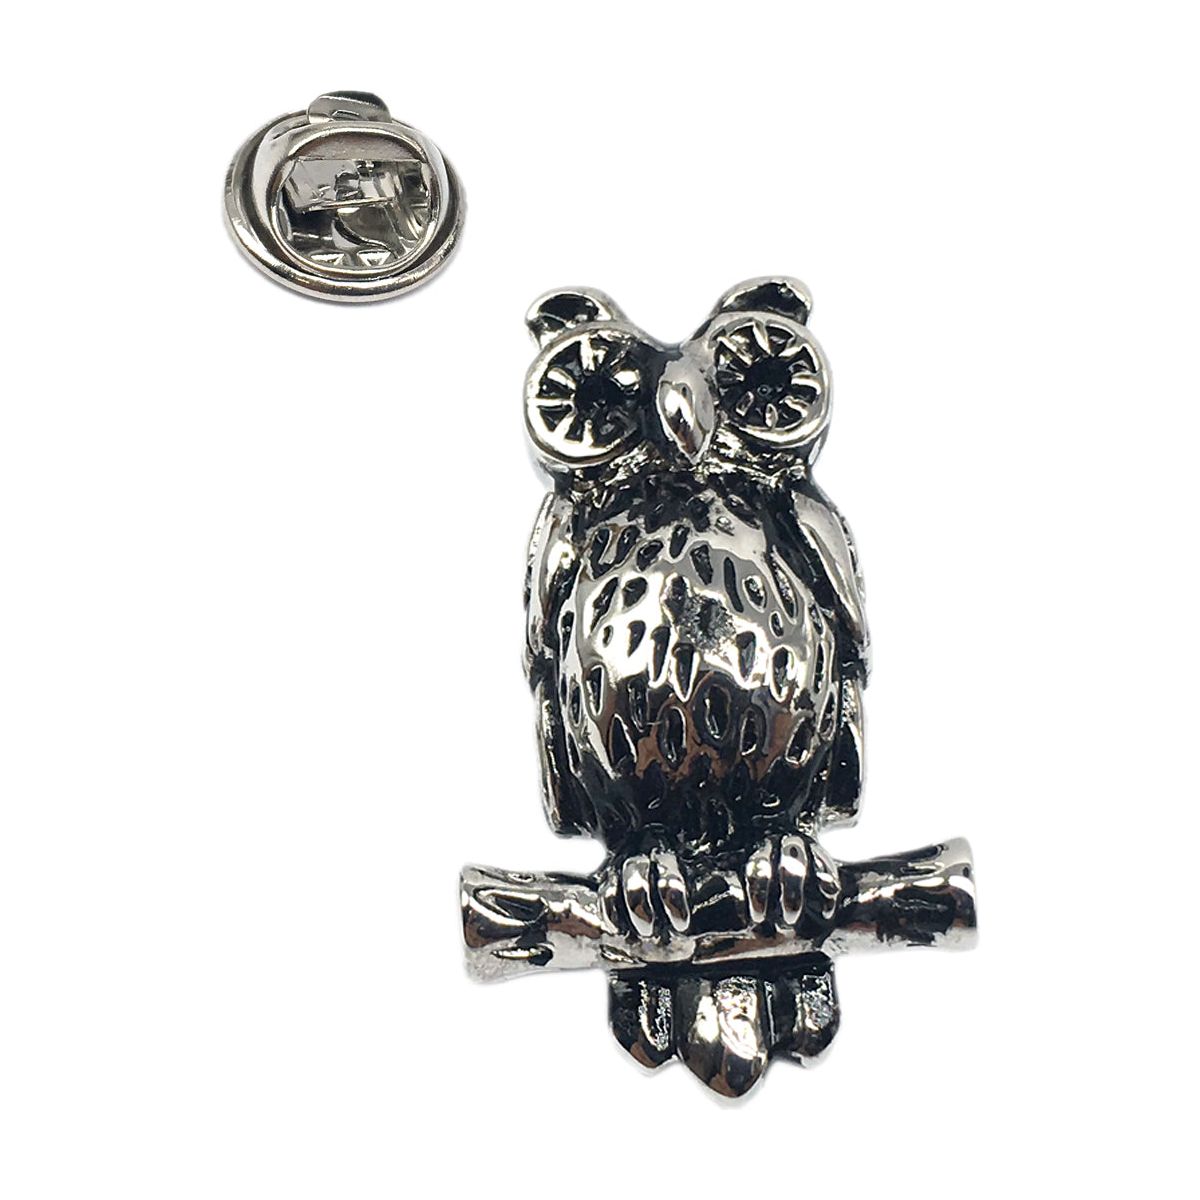 Owl on a Perch Lapel Pin Badge - Ashton and Finch